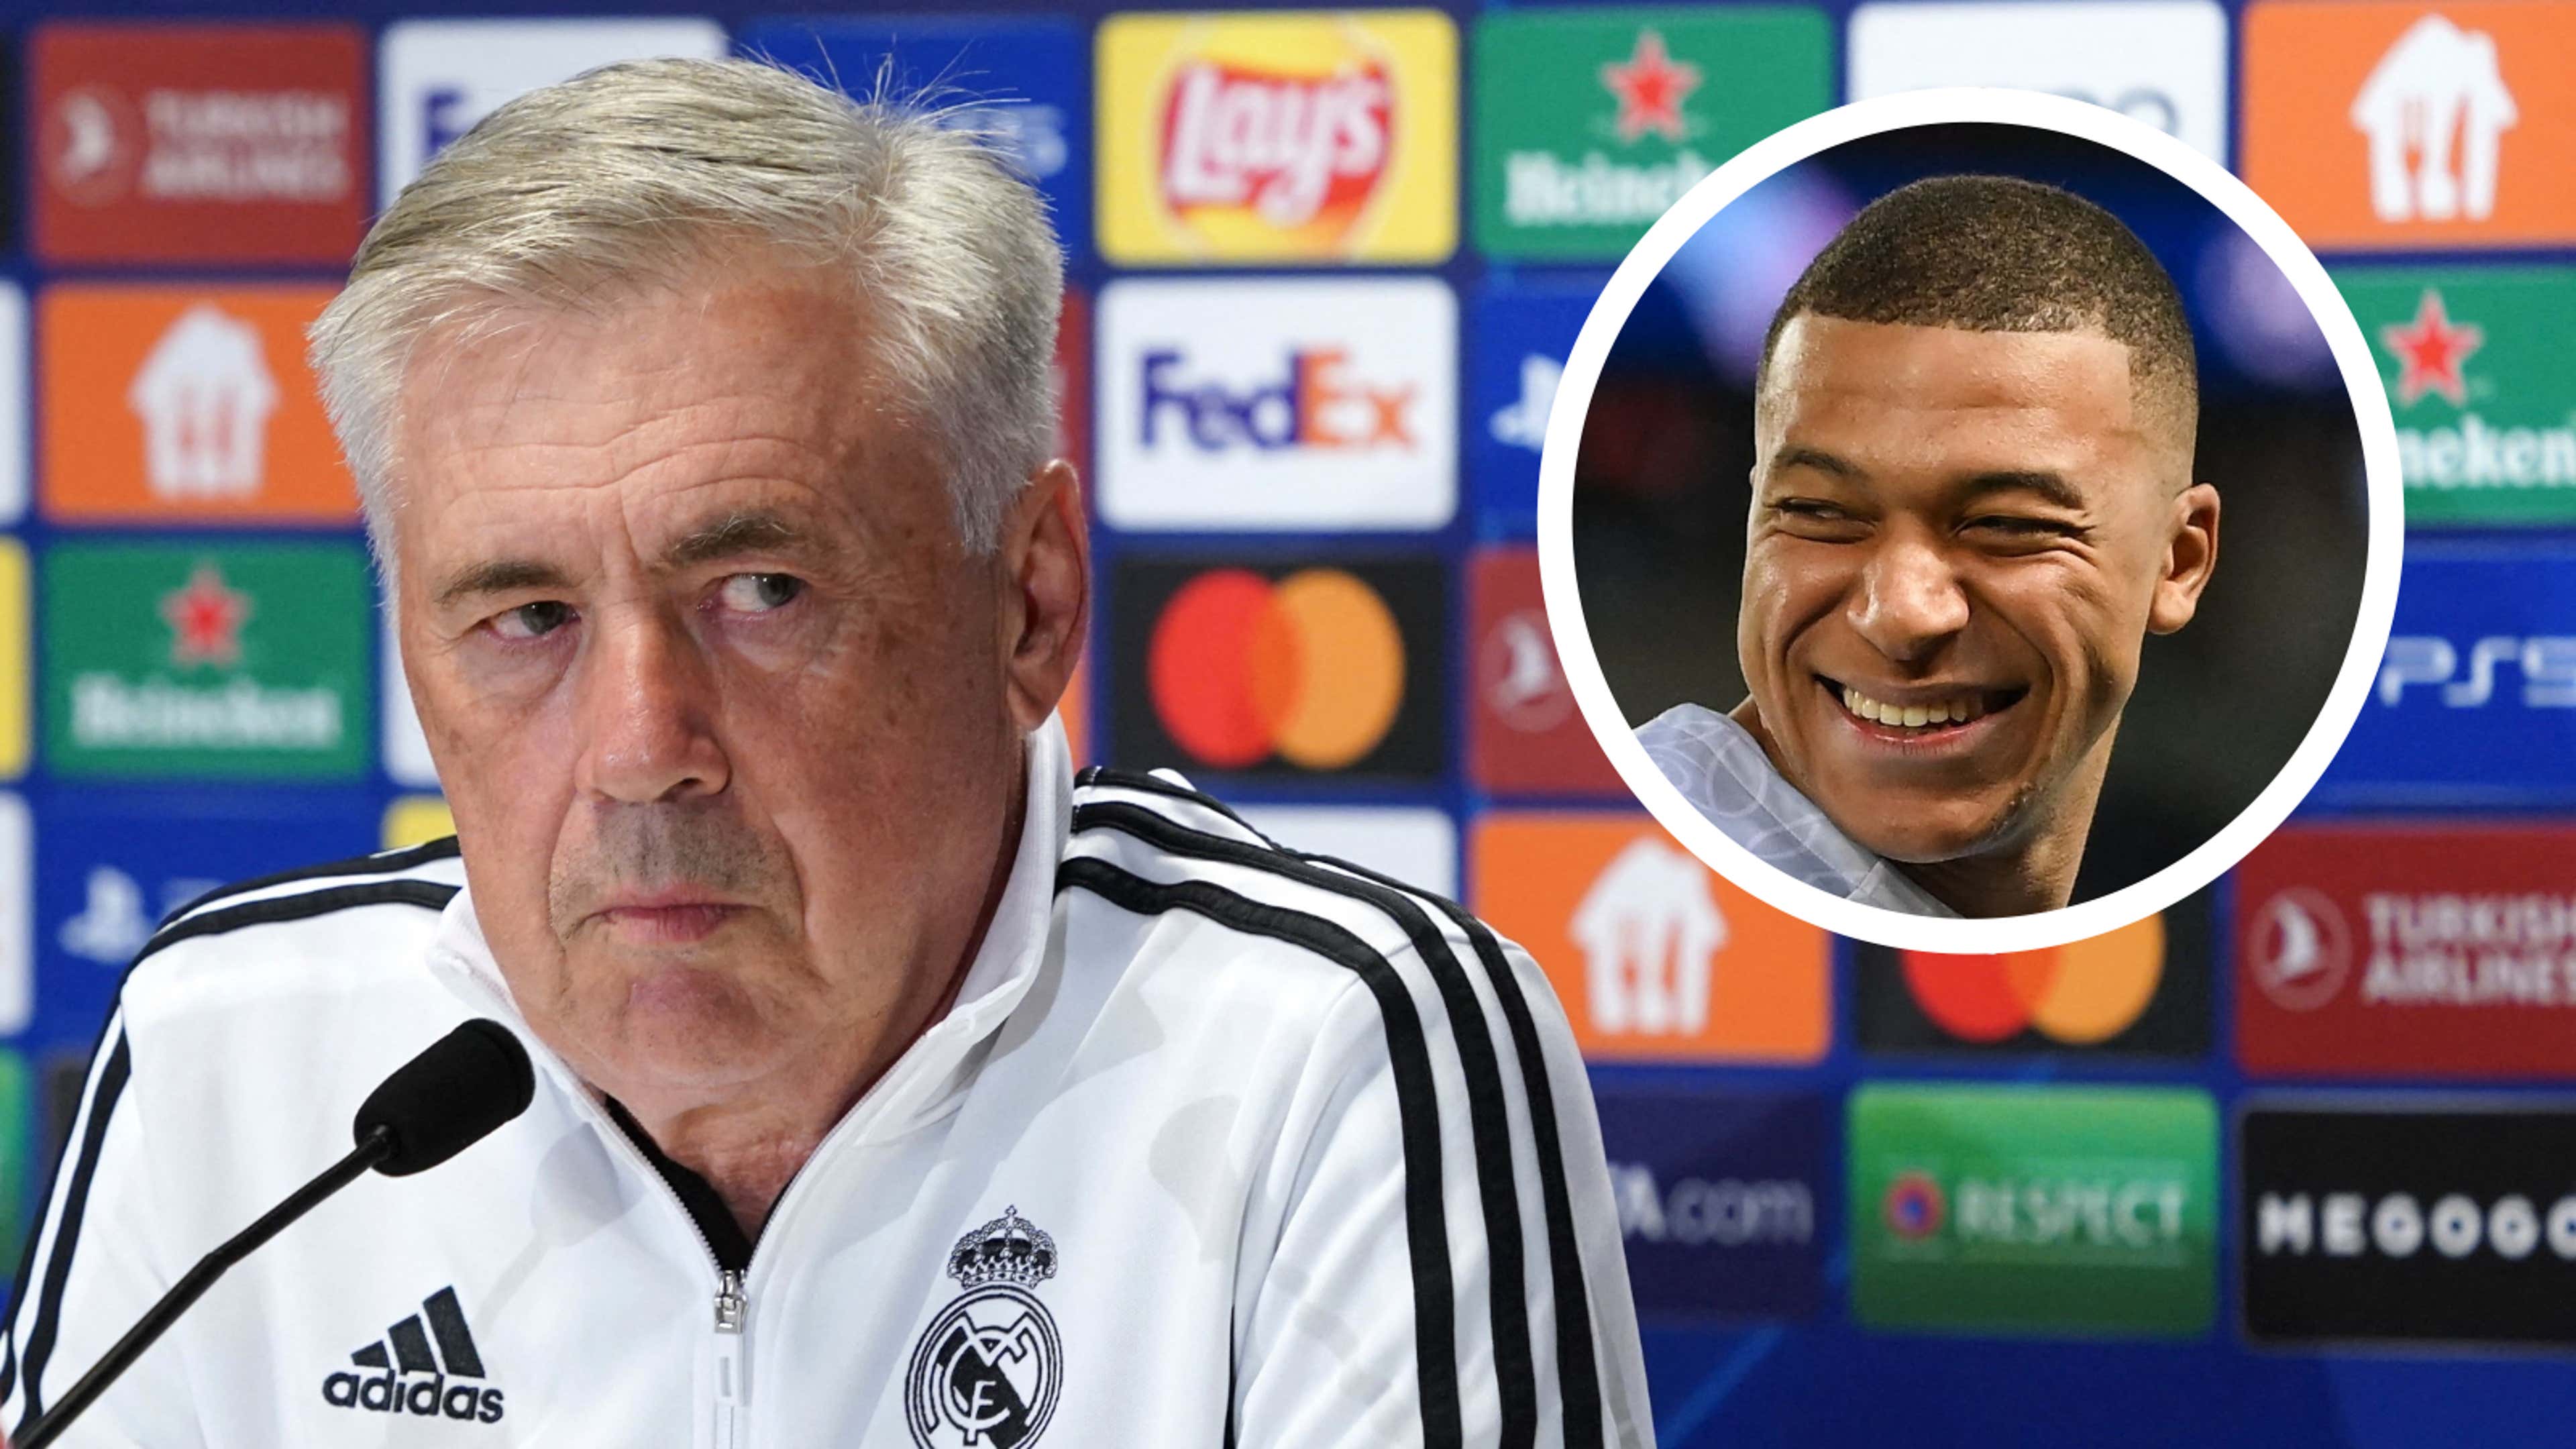 You have the courage to ask that?' - Ancelotti gives blunt response when quizzed on Mbappe to Real Madrid rumours | Goal.com